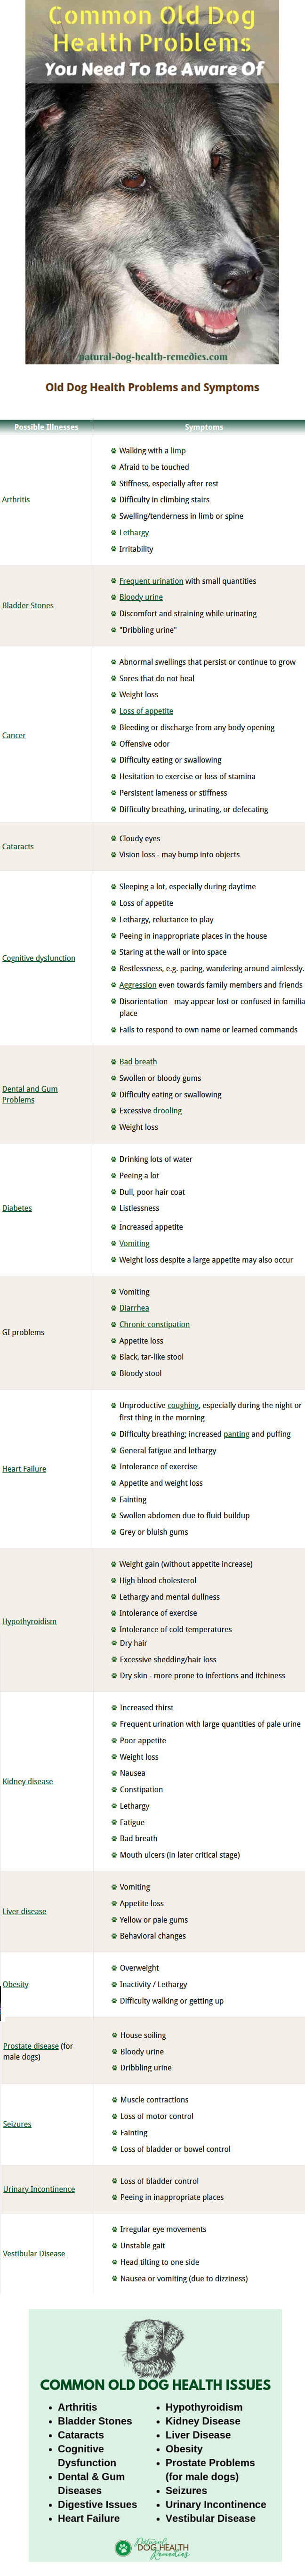 SIGNS & SYMPTOMS OF AGEING, SENIOR AND OLD DOG - courtesy of WWW.NATURAL-DOG-HEALTH-REMEDIES.COM !